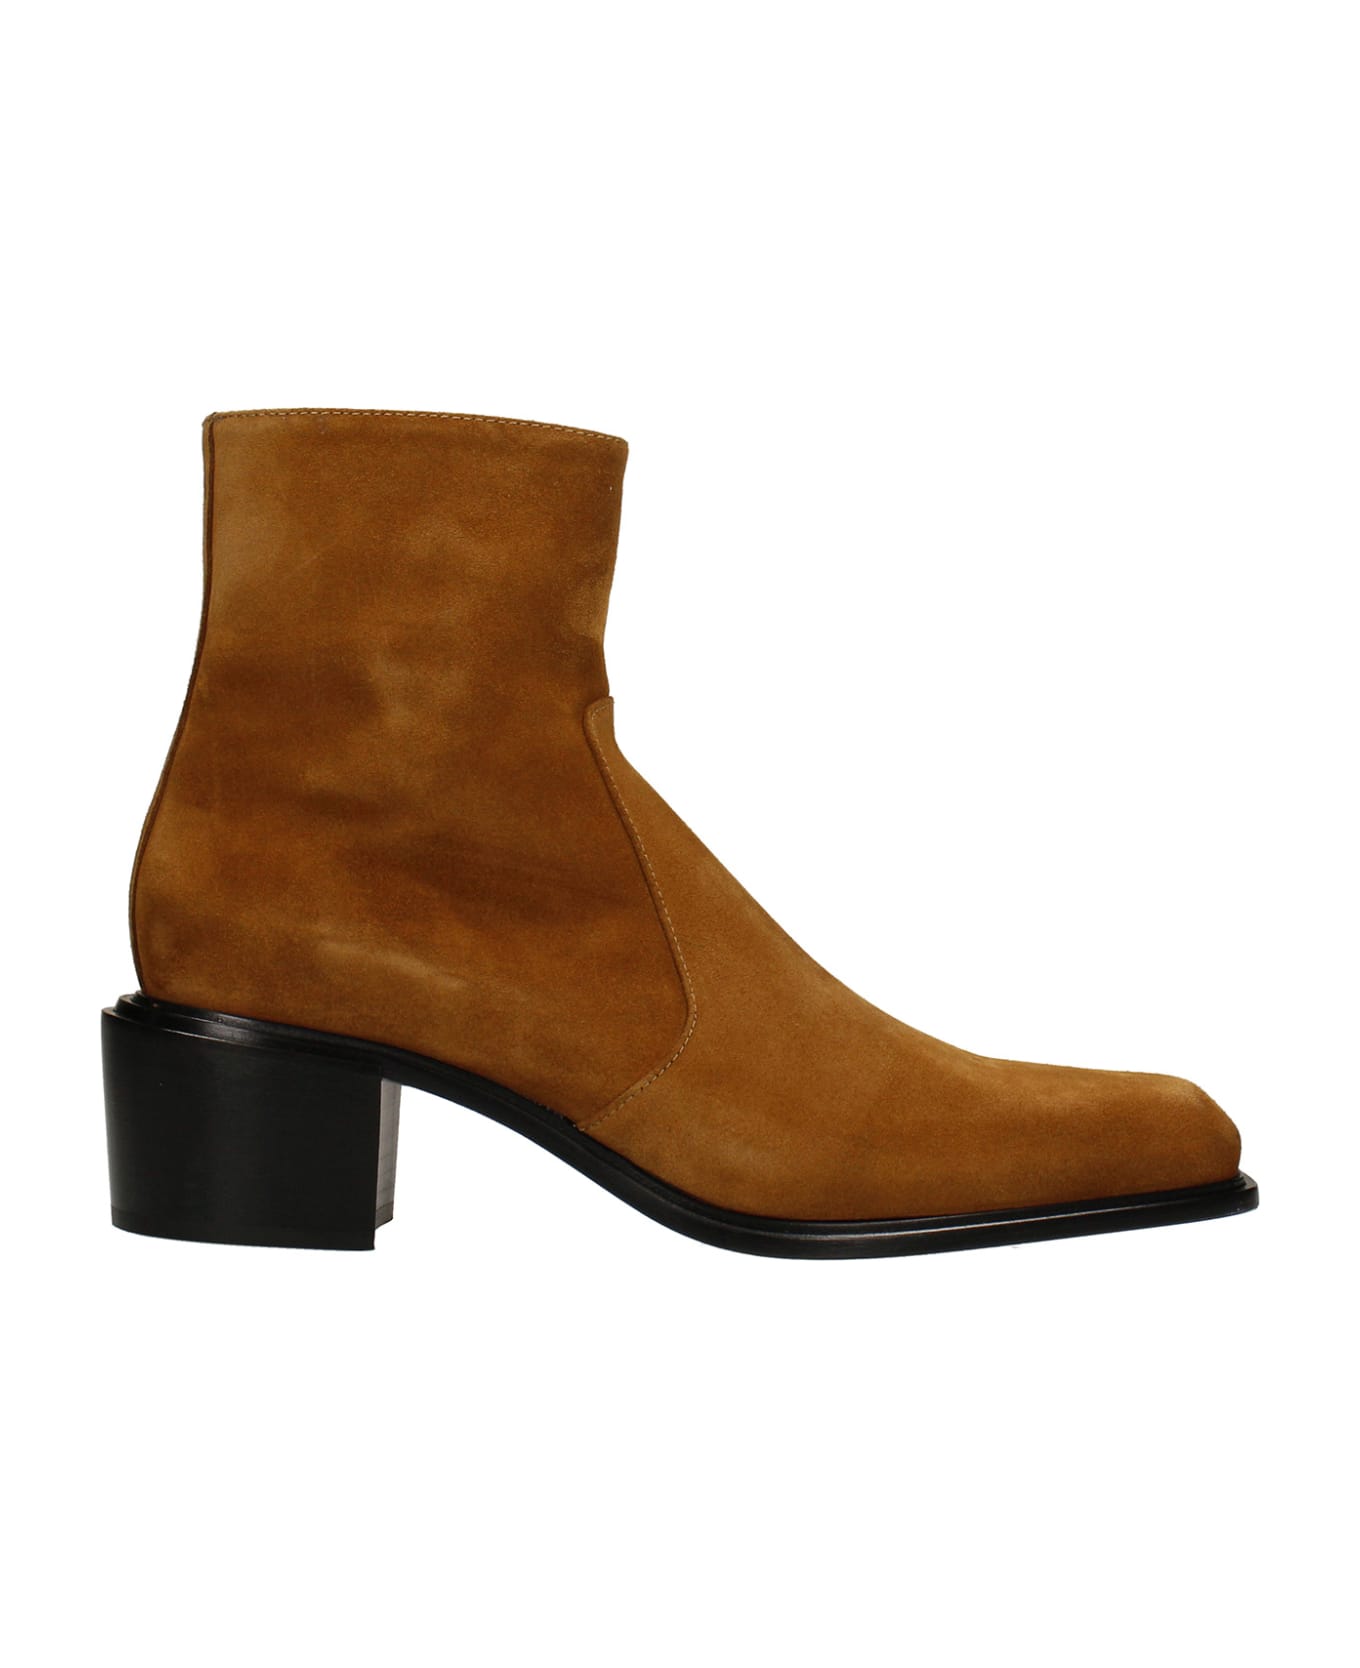 Cesare Paciotti Ankle Boots In Leather Color Suede - leather color